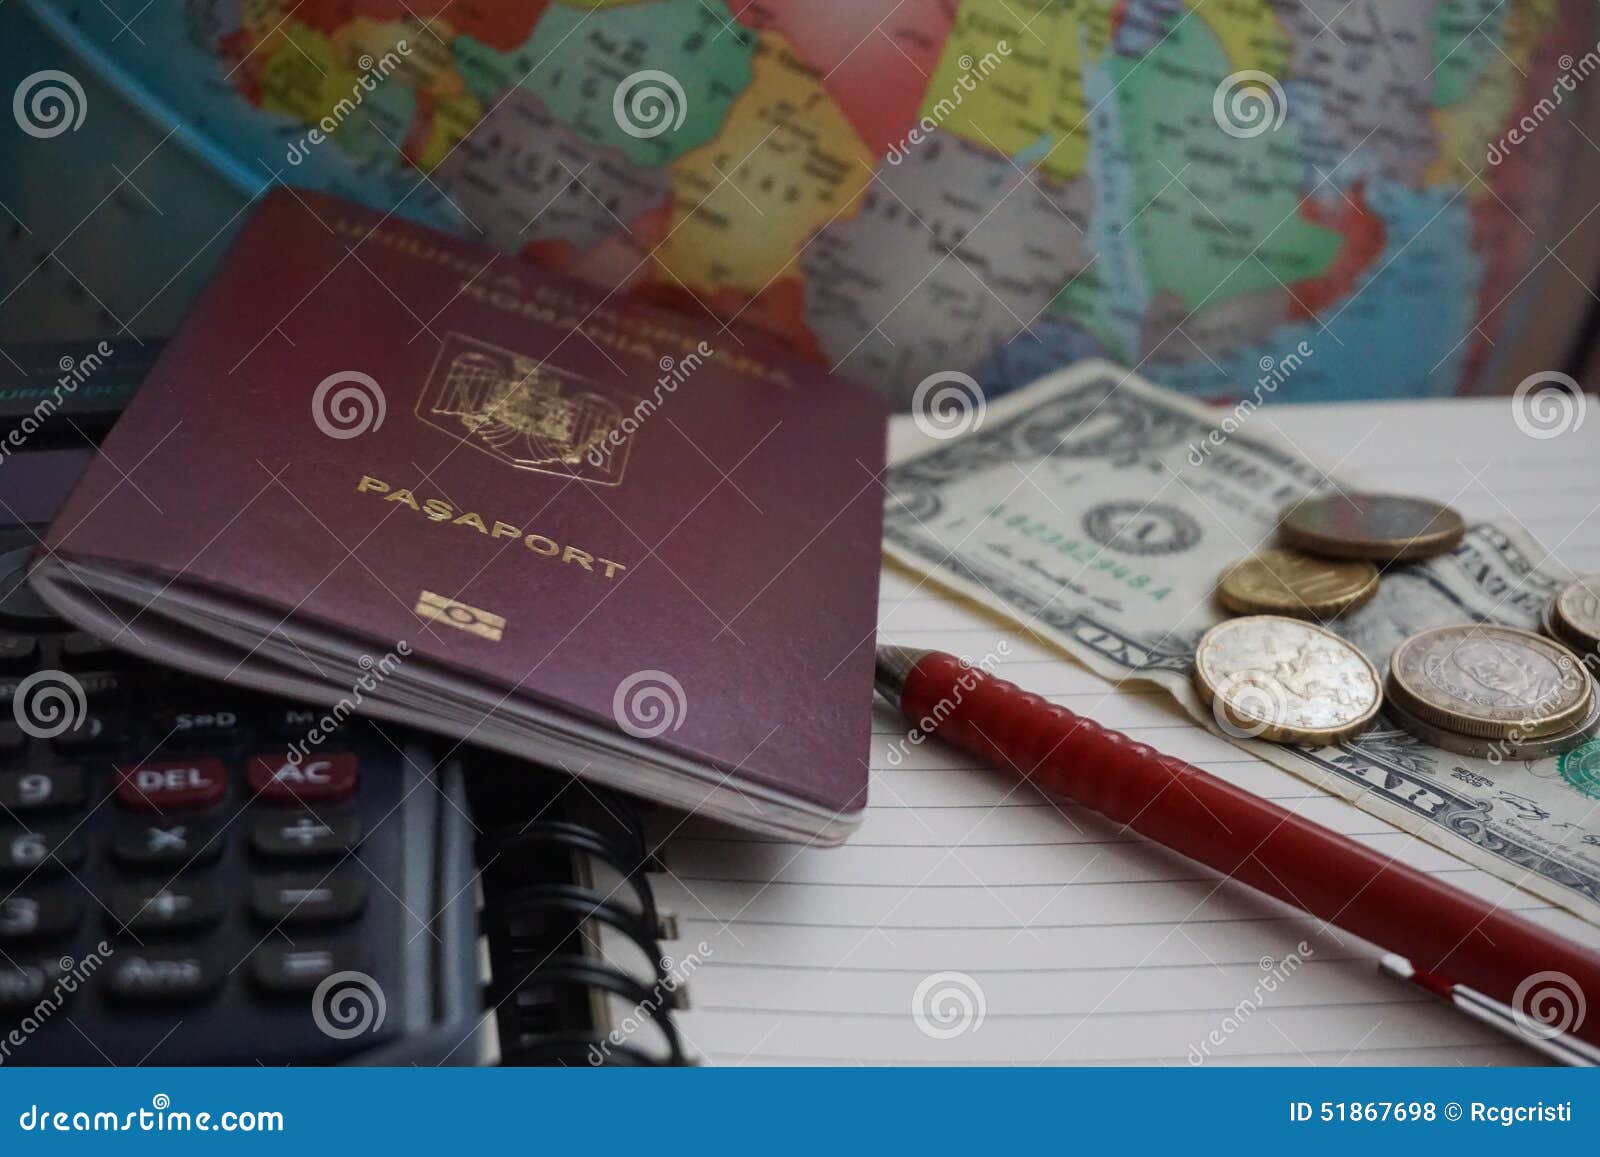 travel planning and budgeting